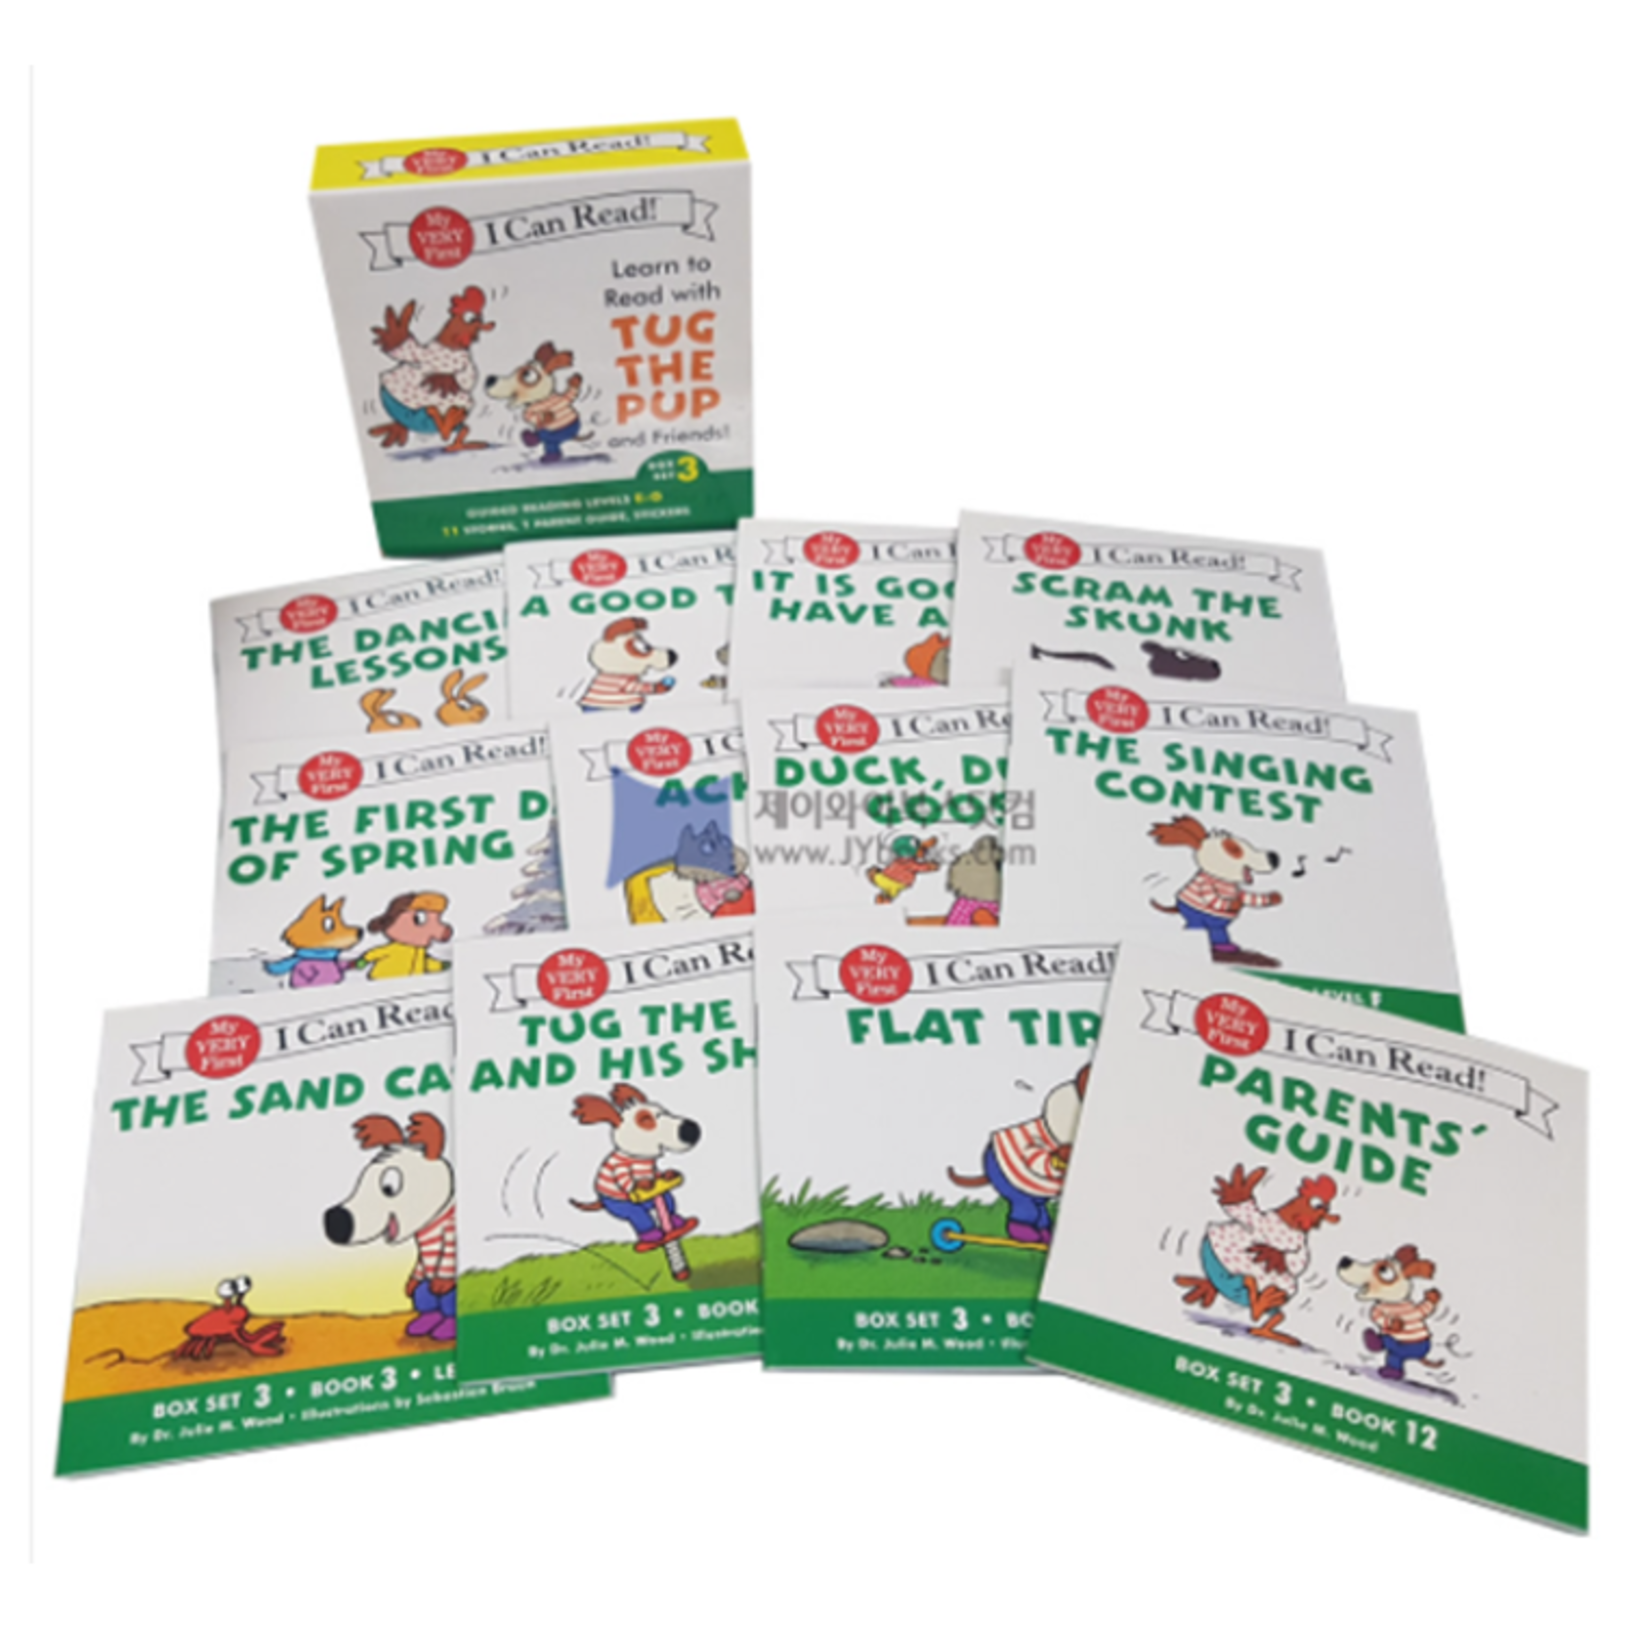 I Can Read! My Very First Learn to With Tug the Pup and Friends Box Set